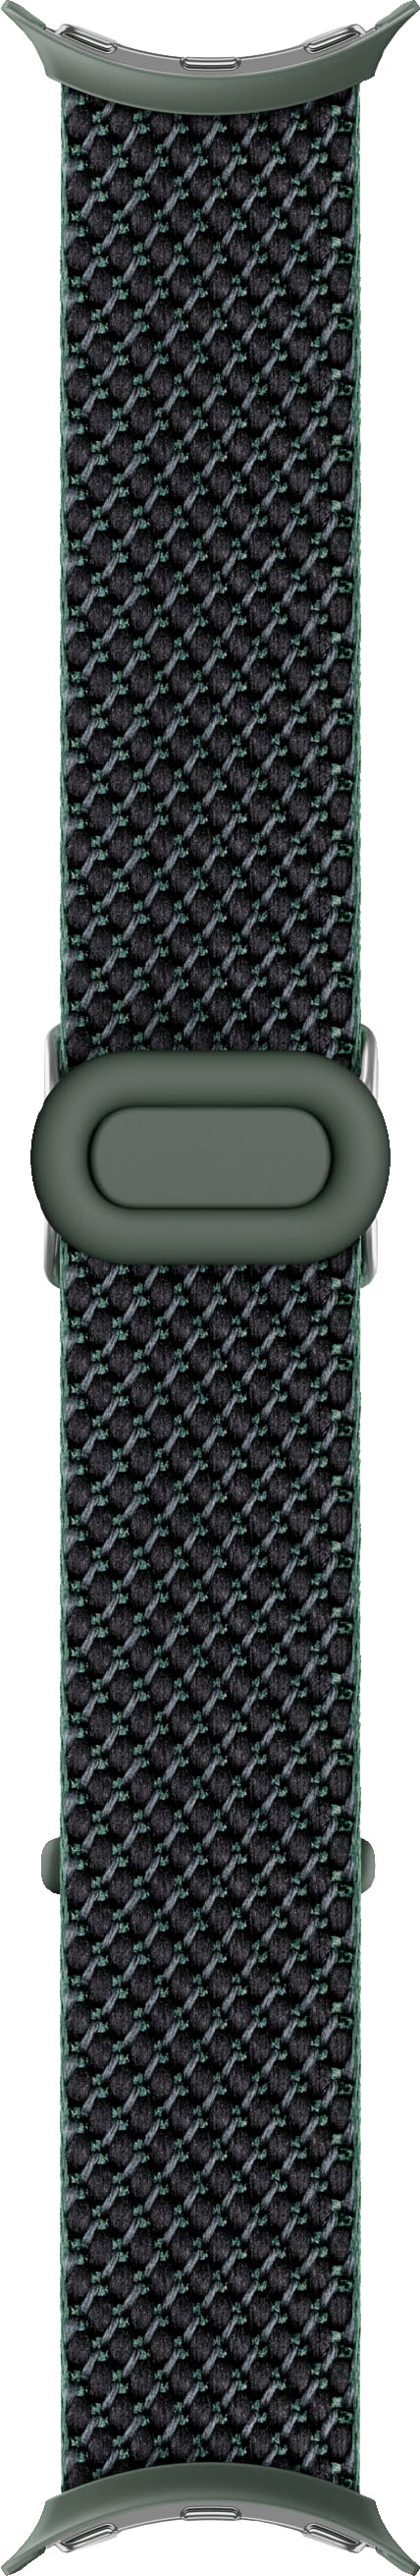 Google Woven Band, One Size Ivy GA03270-WW - Best Buy